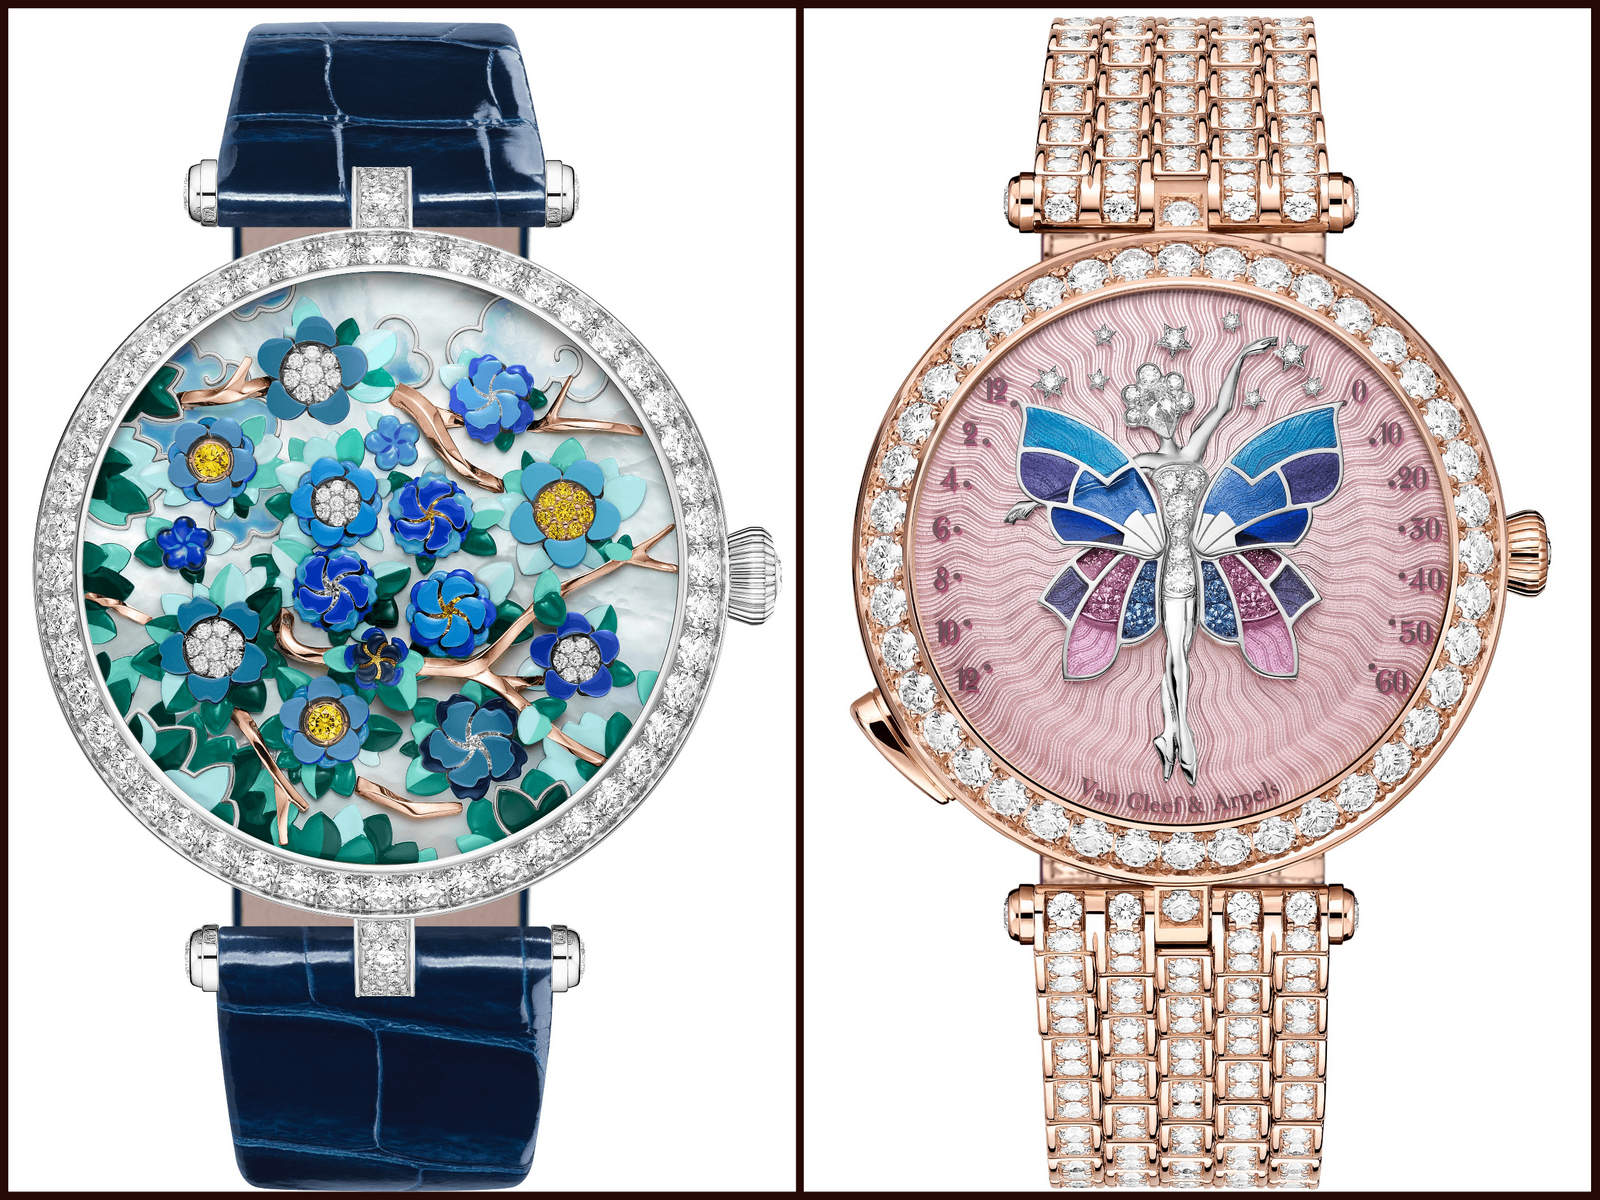 Flowers, fairies, and seasons, Van Cleef & Arpels’ poetic complications collection of timepieces is all things enchanting